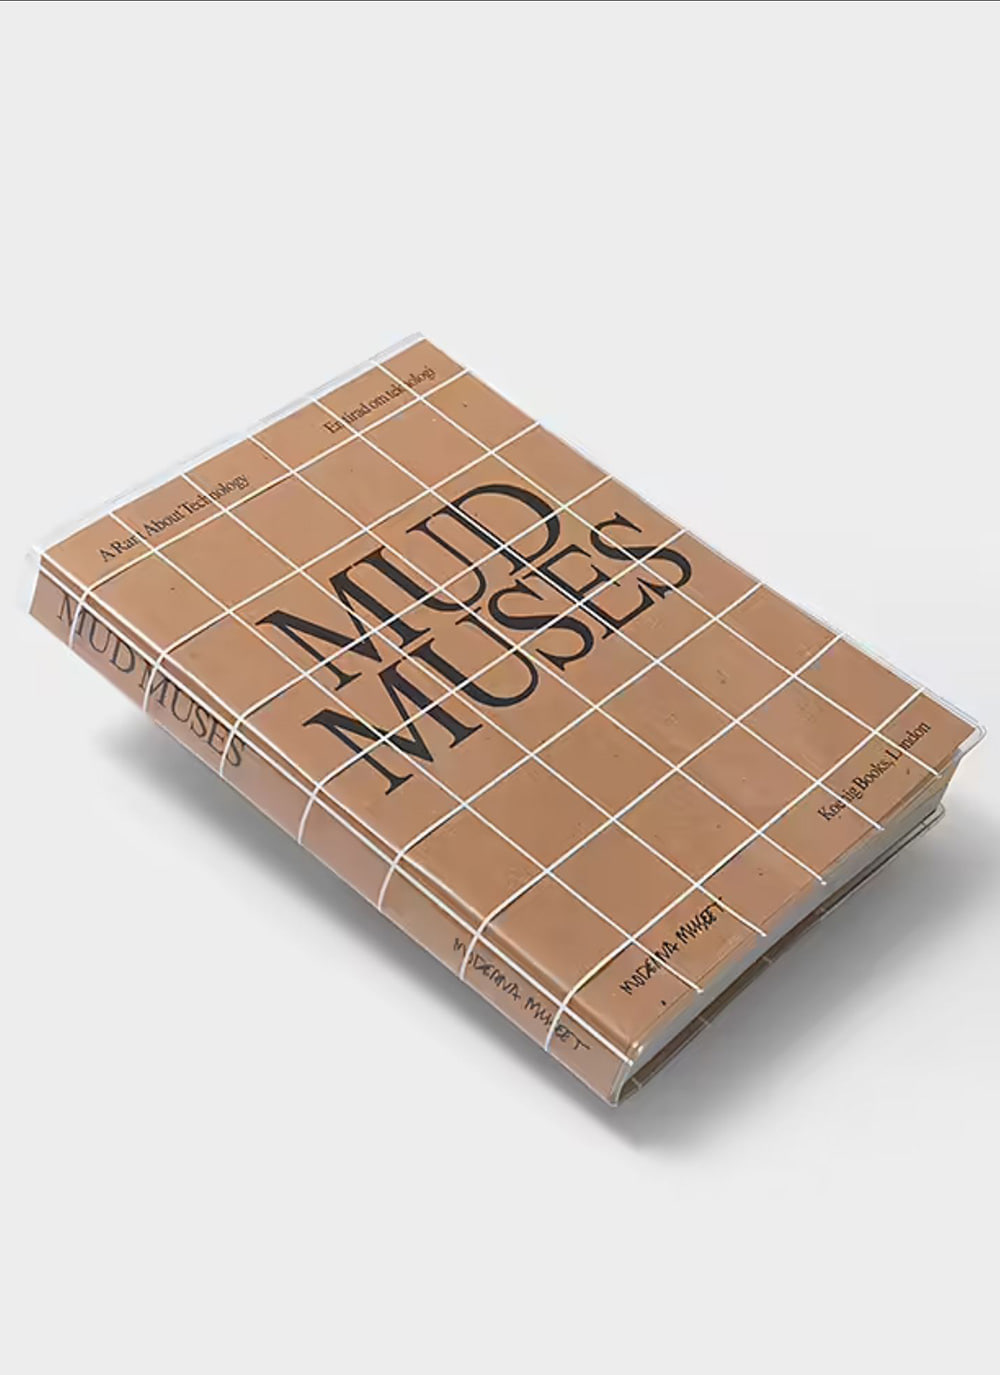 Mud Muses Exhibition catalogue, 2019